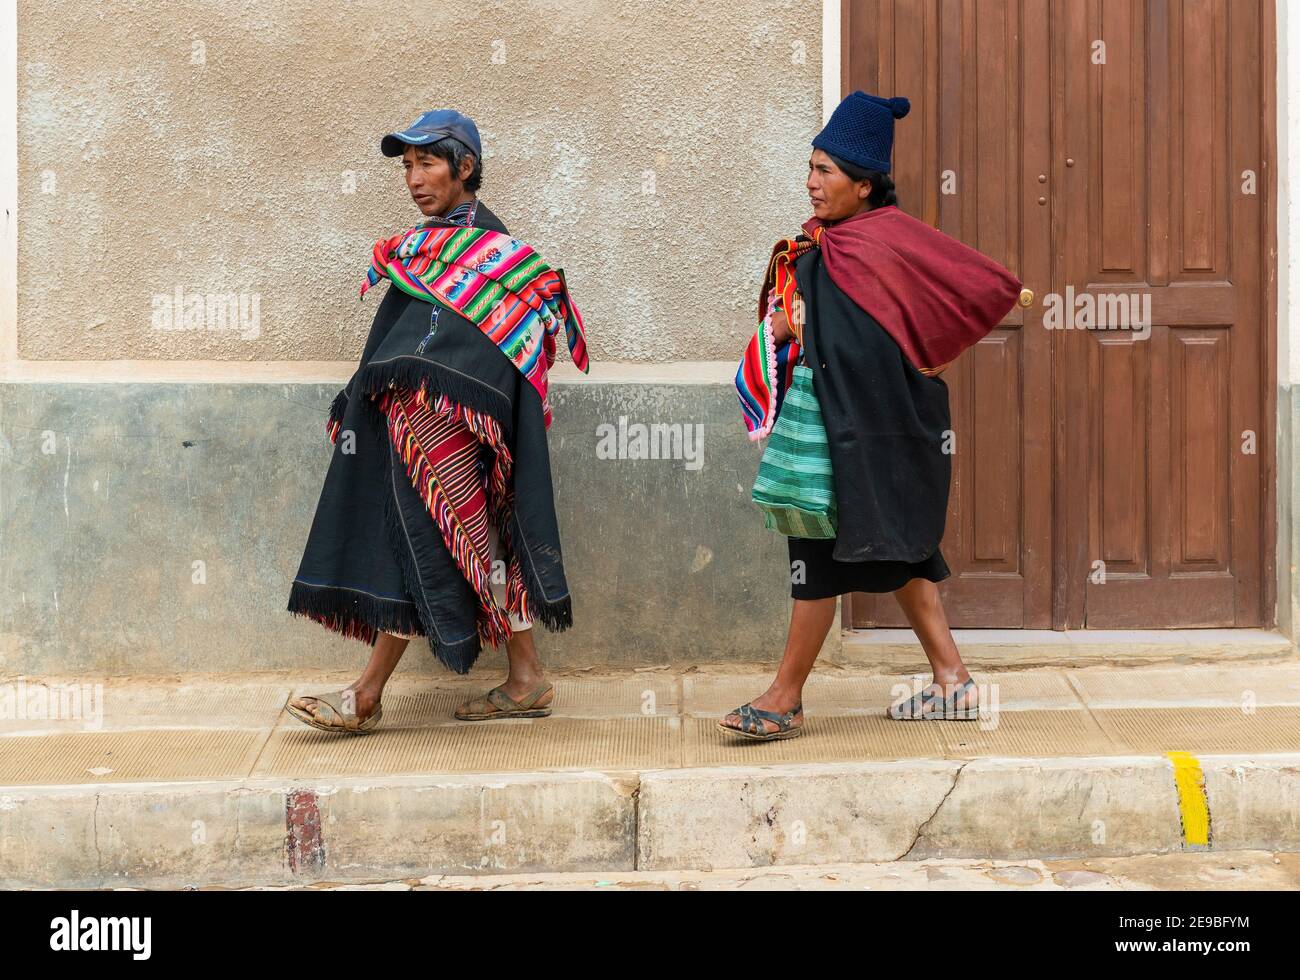 Two Bolivian Tarabuco indigenous in traditional clothing walking in a street with colonial architecture near Sucre city, Tarabuco, Bolivia. Stock Photo